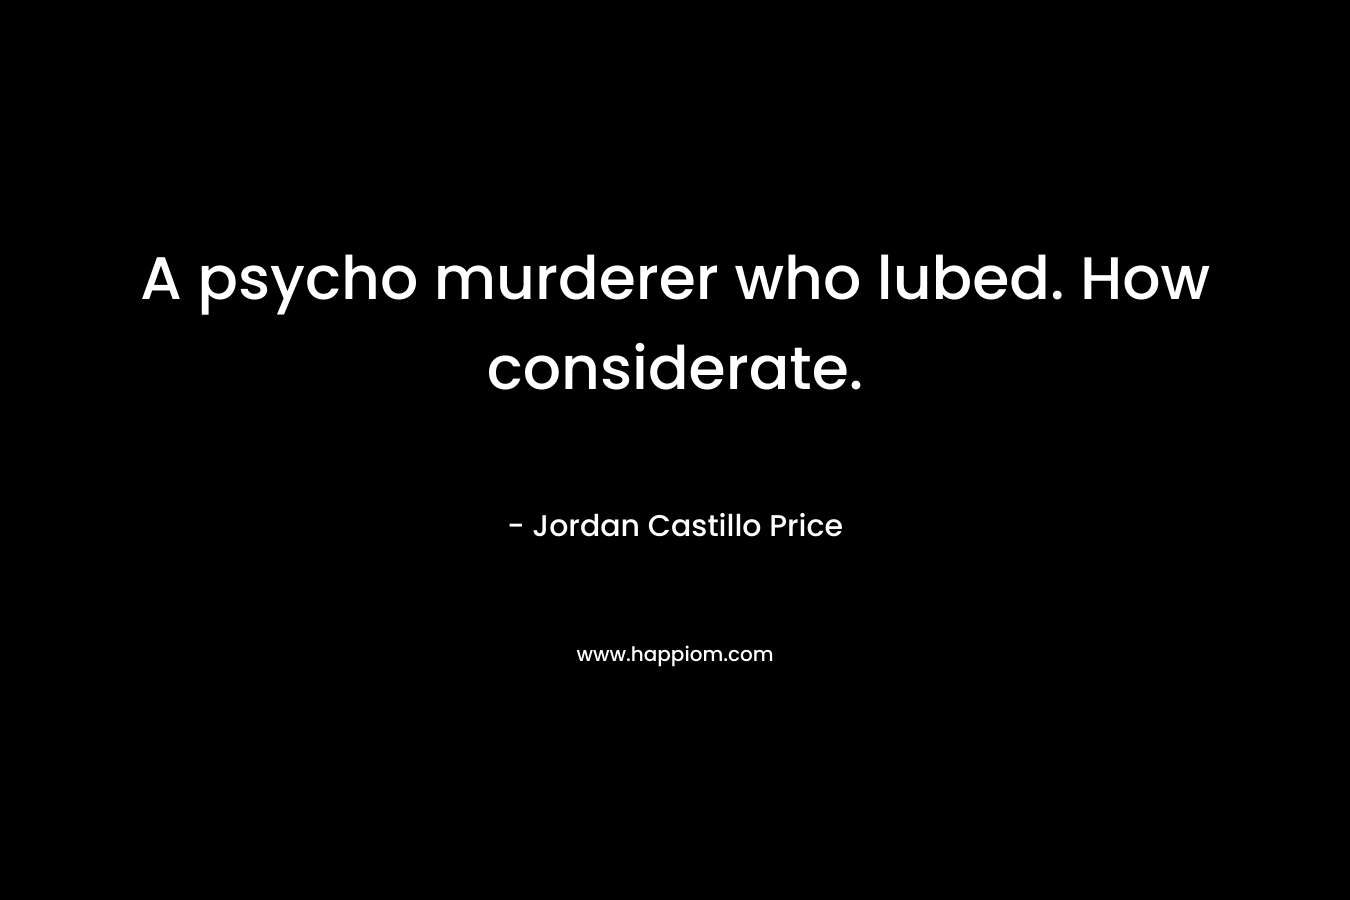 A psycho murderer who lubed. How considerate.